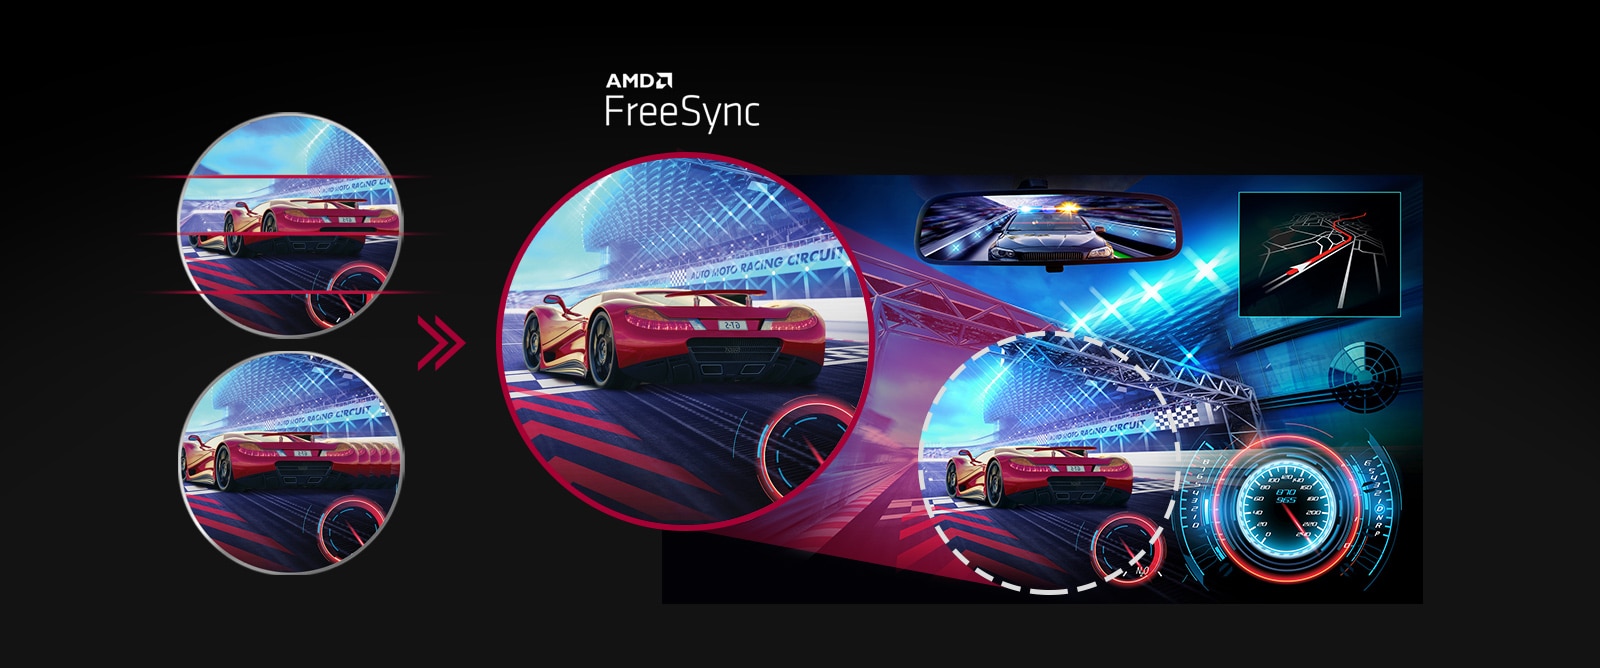 AMD FreeSync™ and more gaming features1